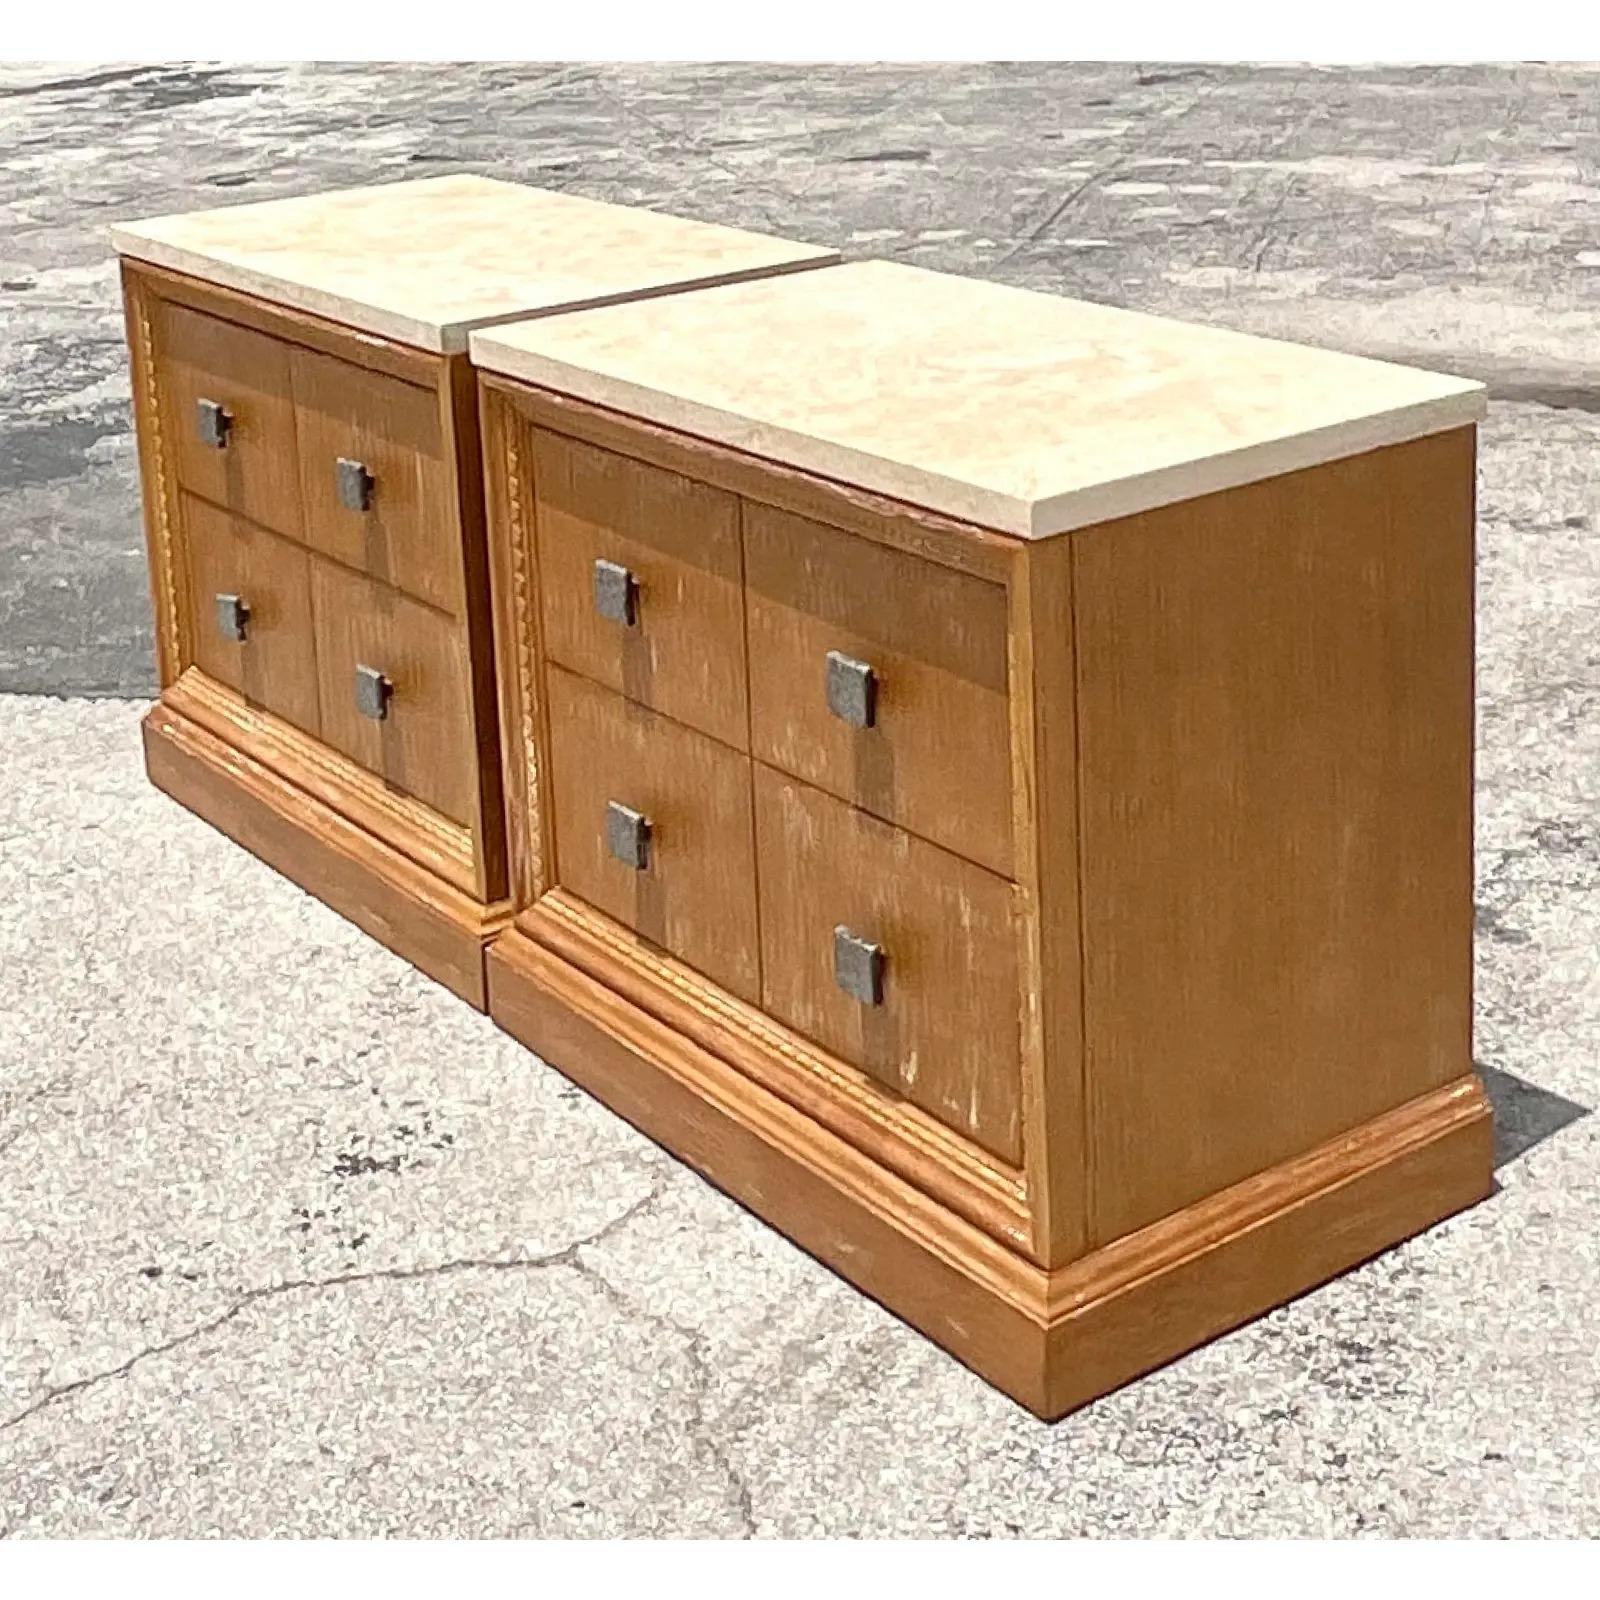 Fantastic vintage pair of Contemporary nightstands. Monumental in size and look. Stone tops and a Cerused oak cabinet. Chic bronze drawer handles. Made by the iconic Century Furniture company. Acquired from a Palm Beach estate.